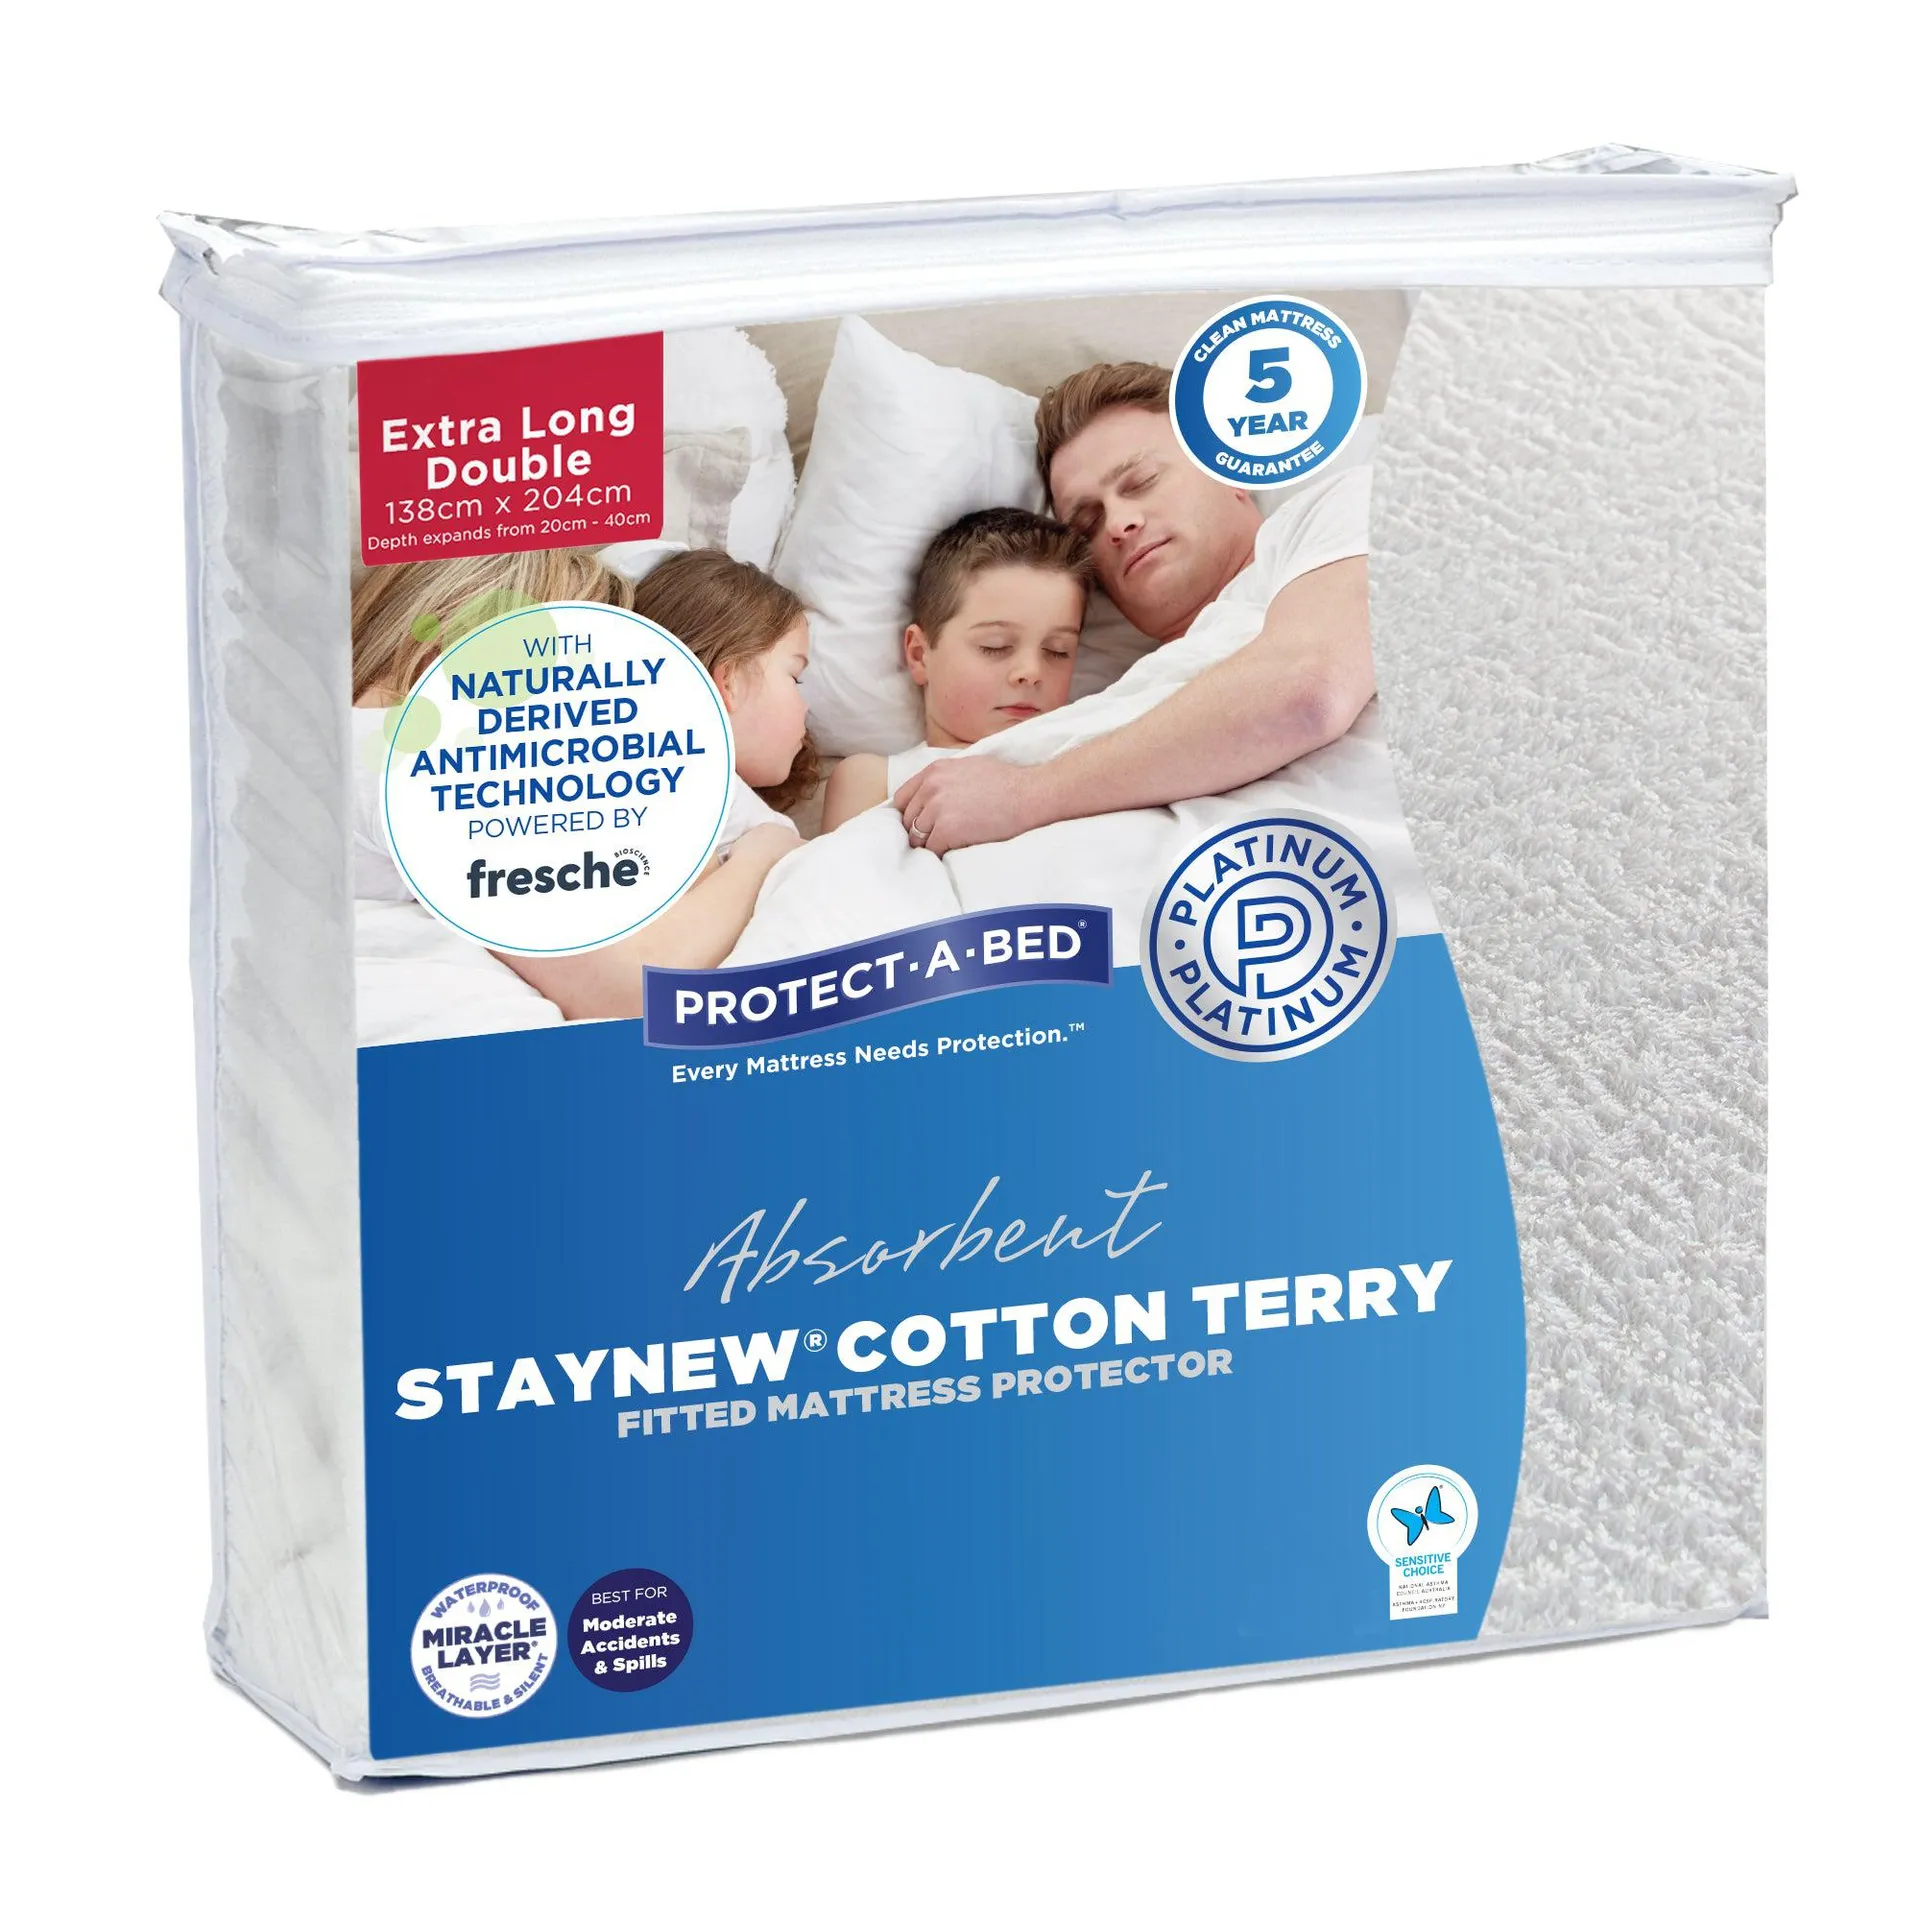 Protect-A-Bed Staynew® Cotton Terry Long Double Mattress Protector